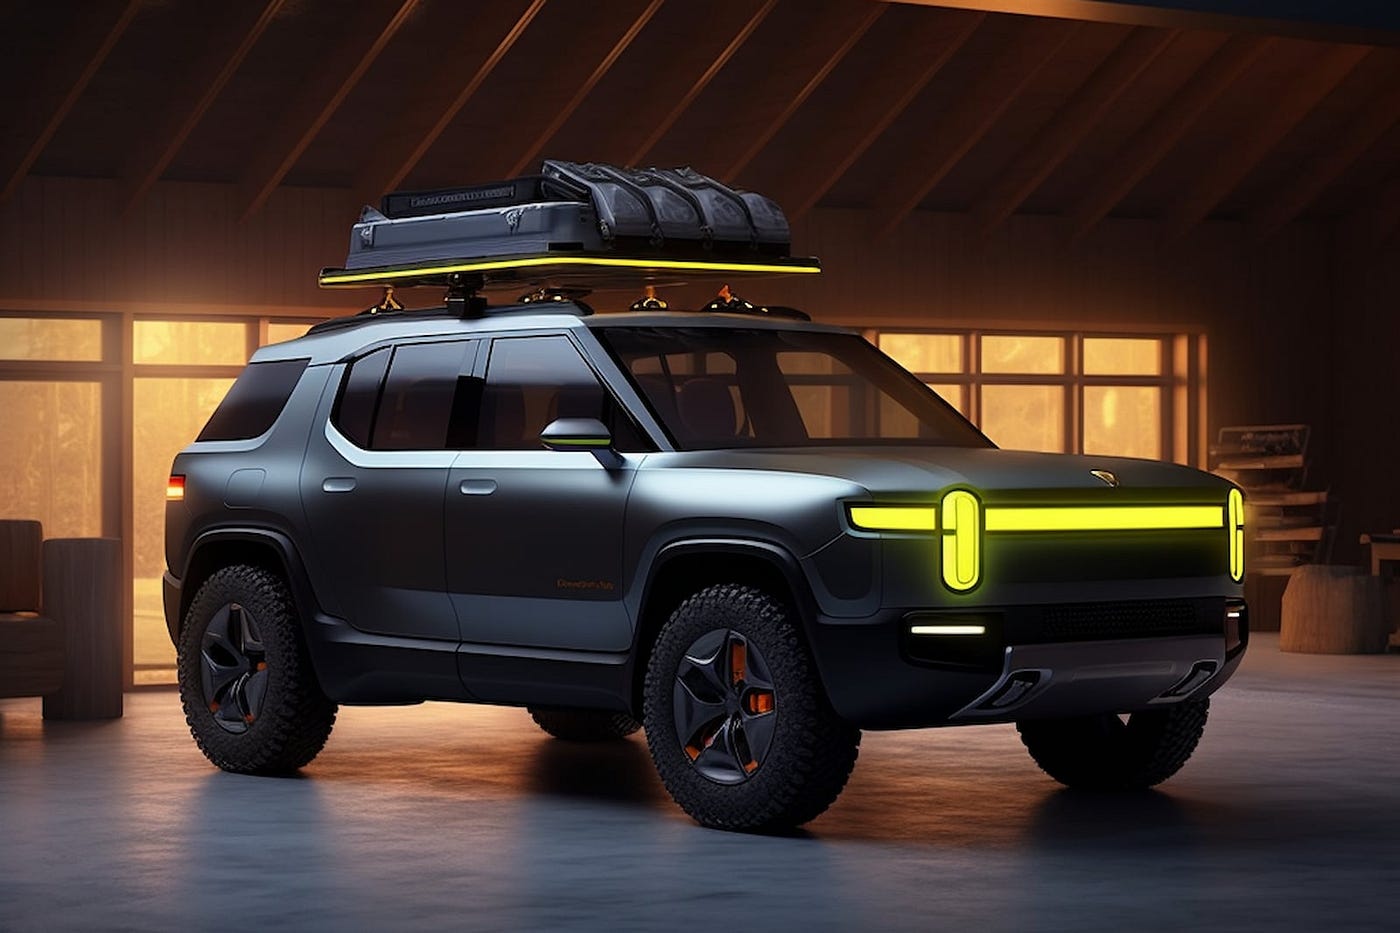 Reportedly, Specifications of Rivian R2 Surface, Initial Pricing Set at $47,500